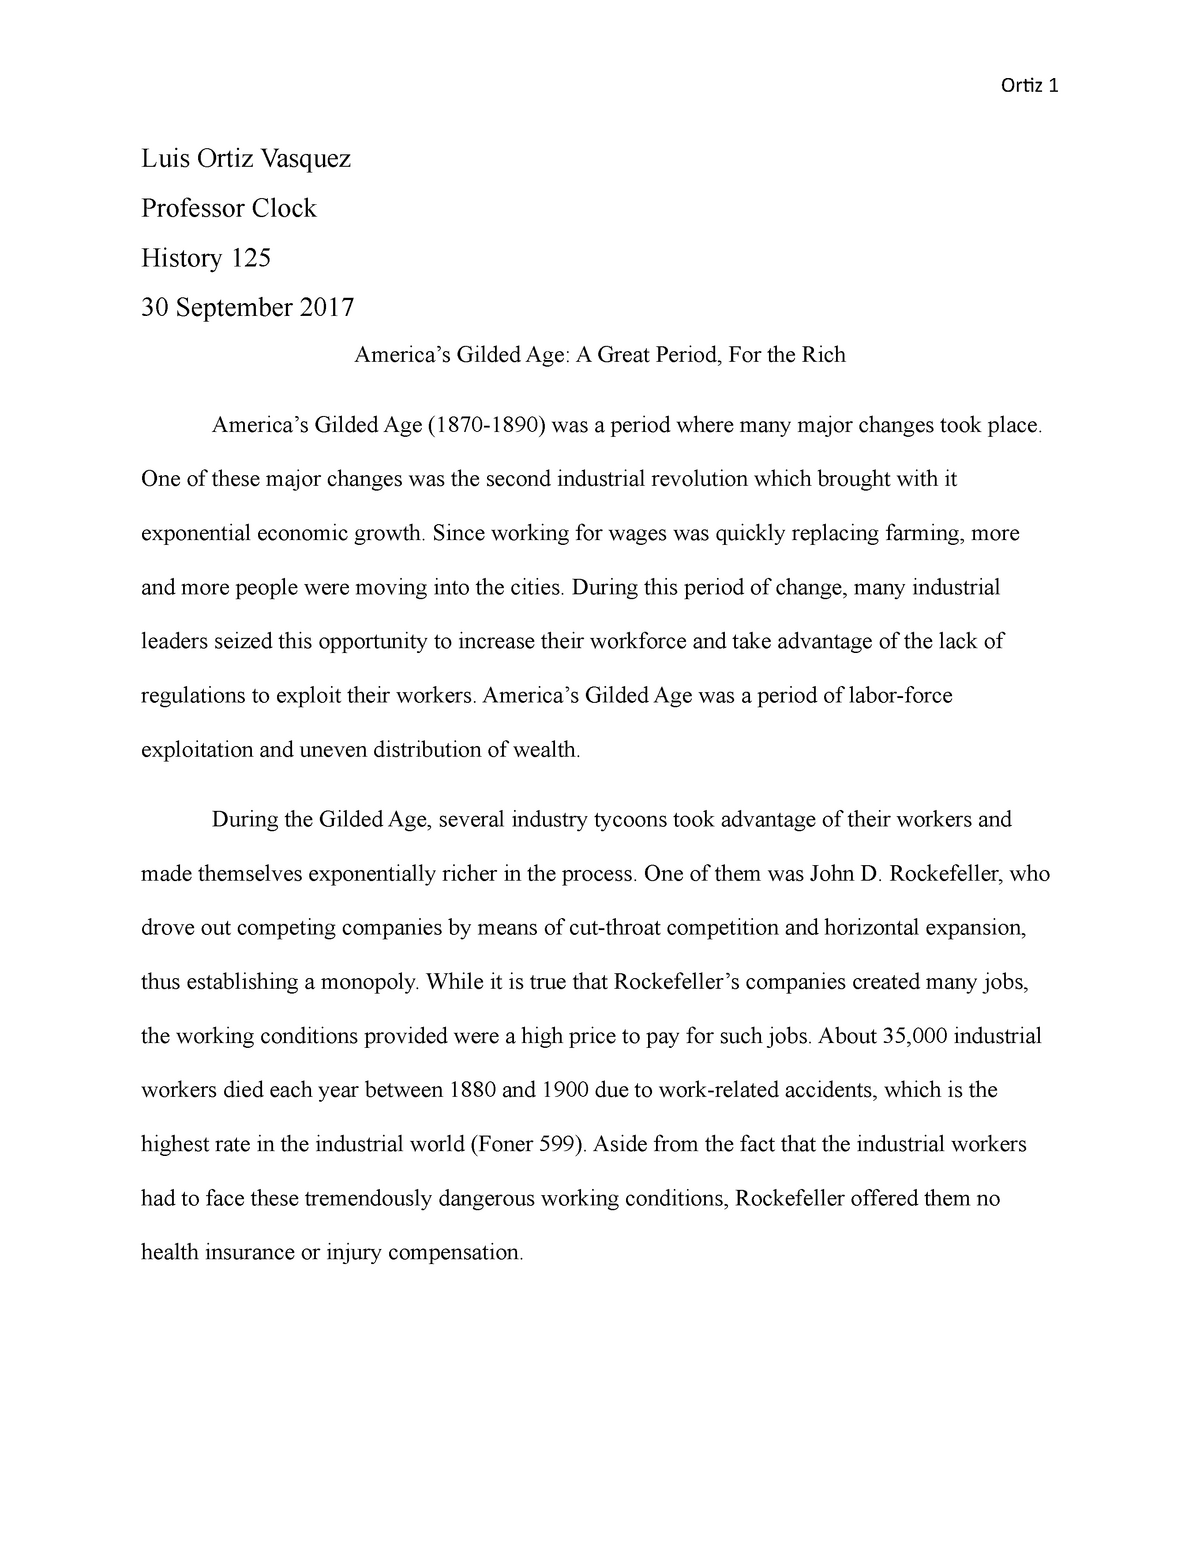 essay on the gilded age